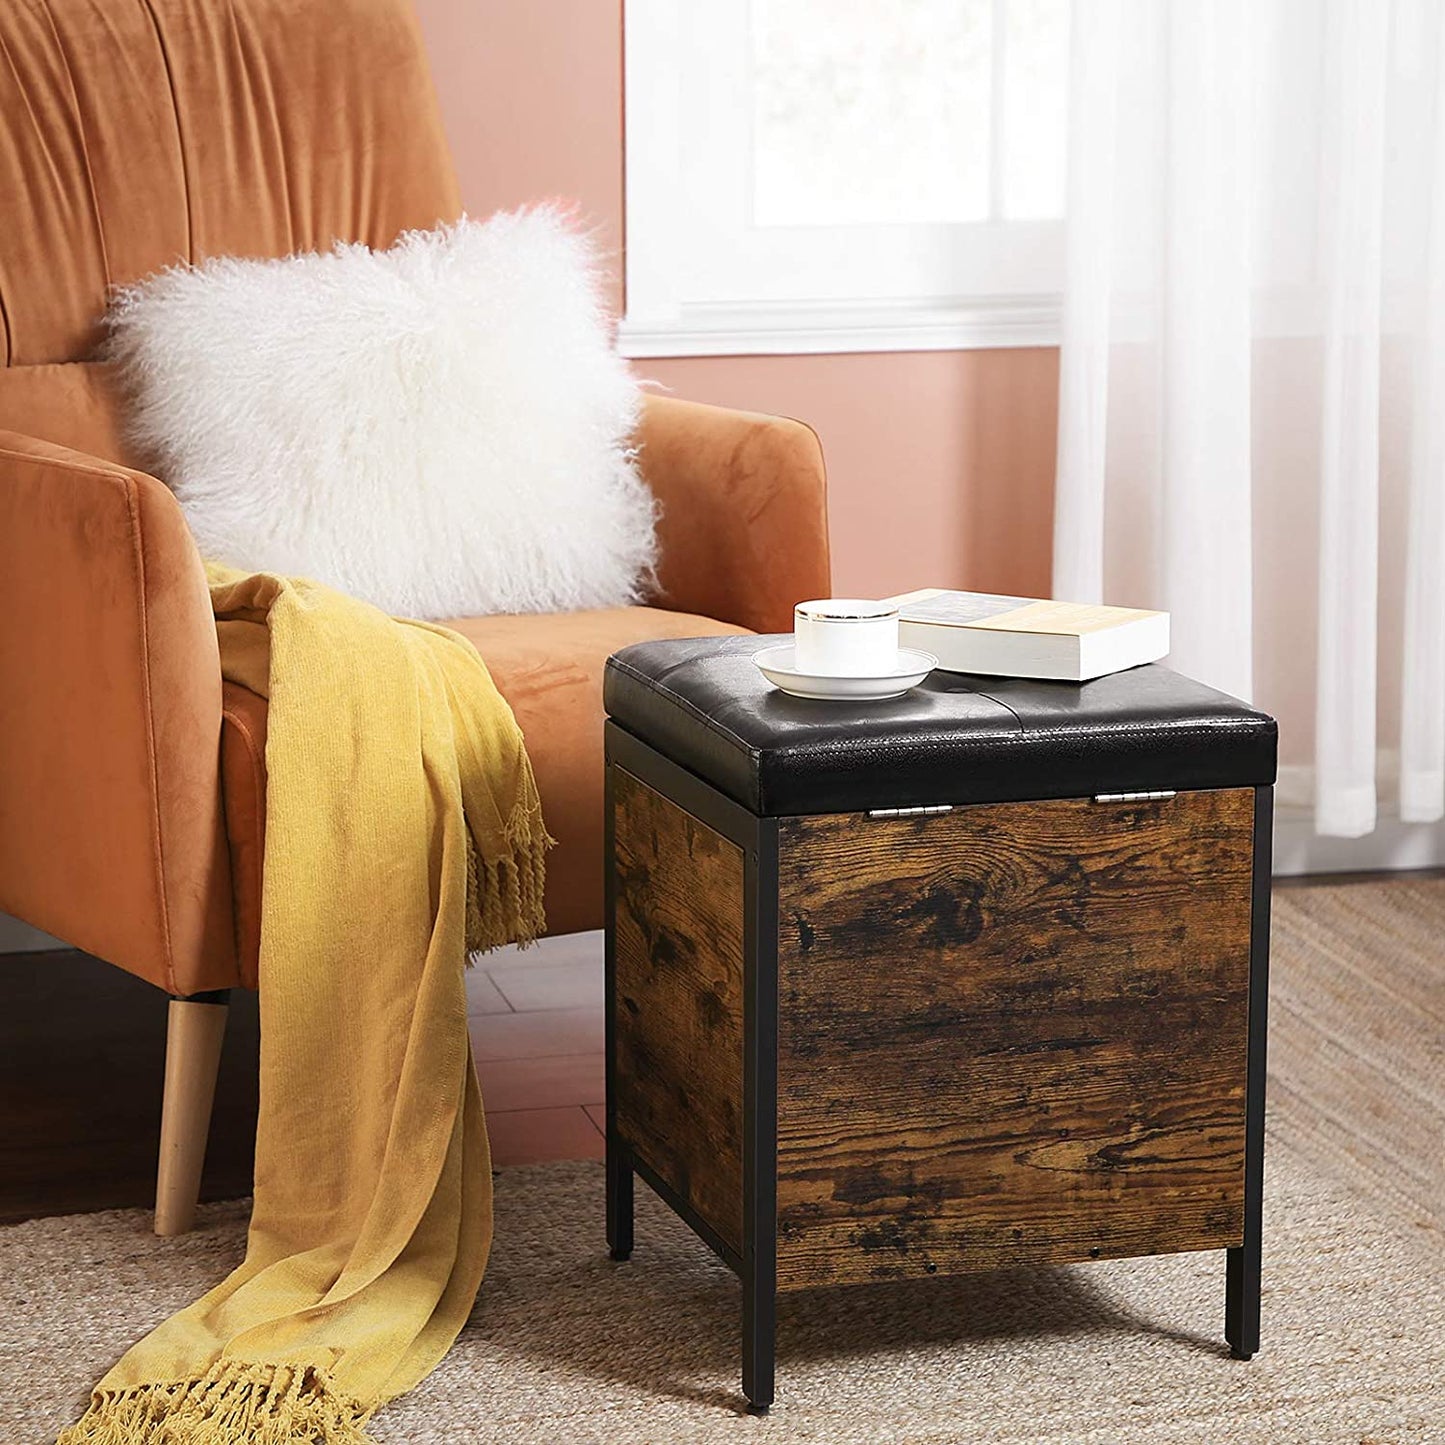 Nancy's Wenatchee Hocker - Stool with storage space - Shoe bench - Footstools - Faux leather and Wood - Industrial - Brown/Black - 40 x 40 x 50 cm 